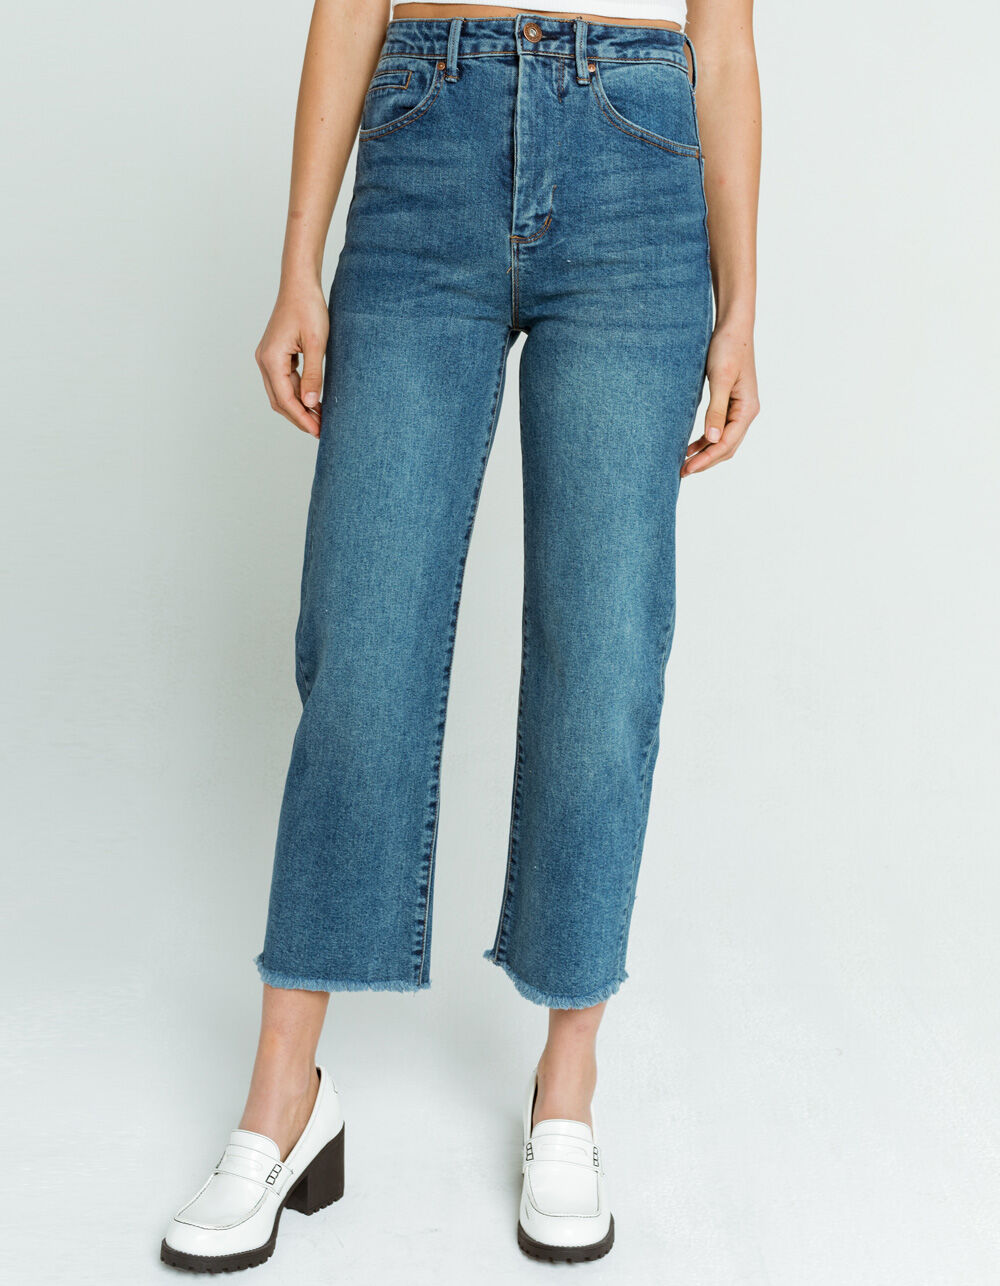 WEST OF MELROSE High And Mighty Wide Leg Womens Jeans - DENIM | Tillys